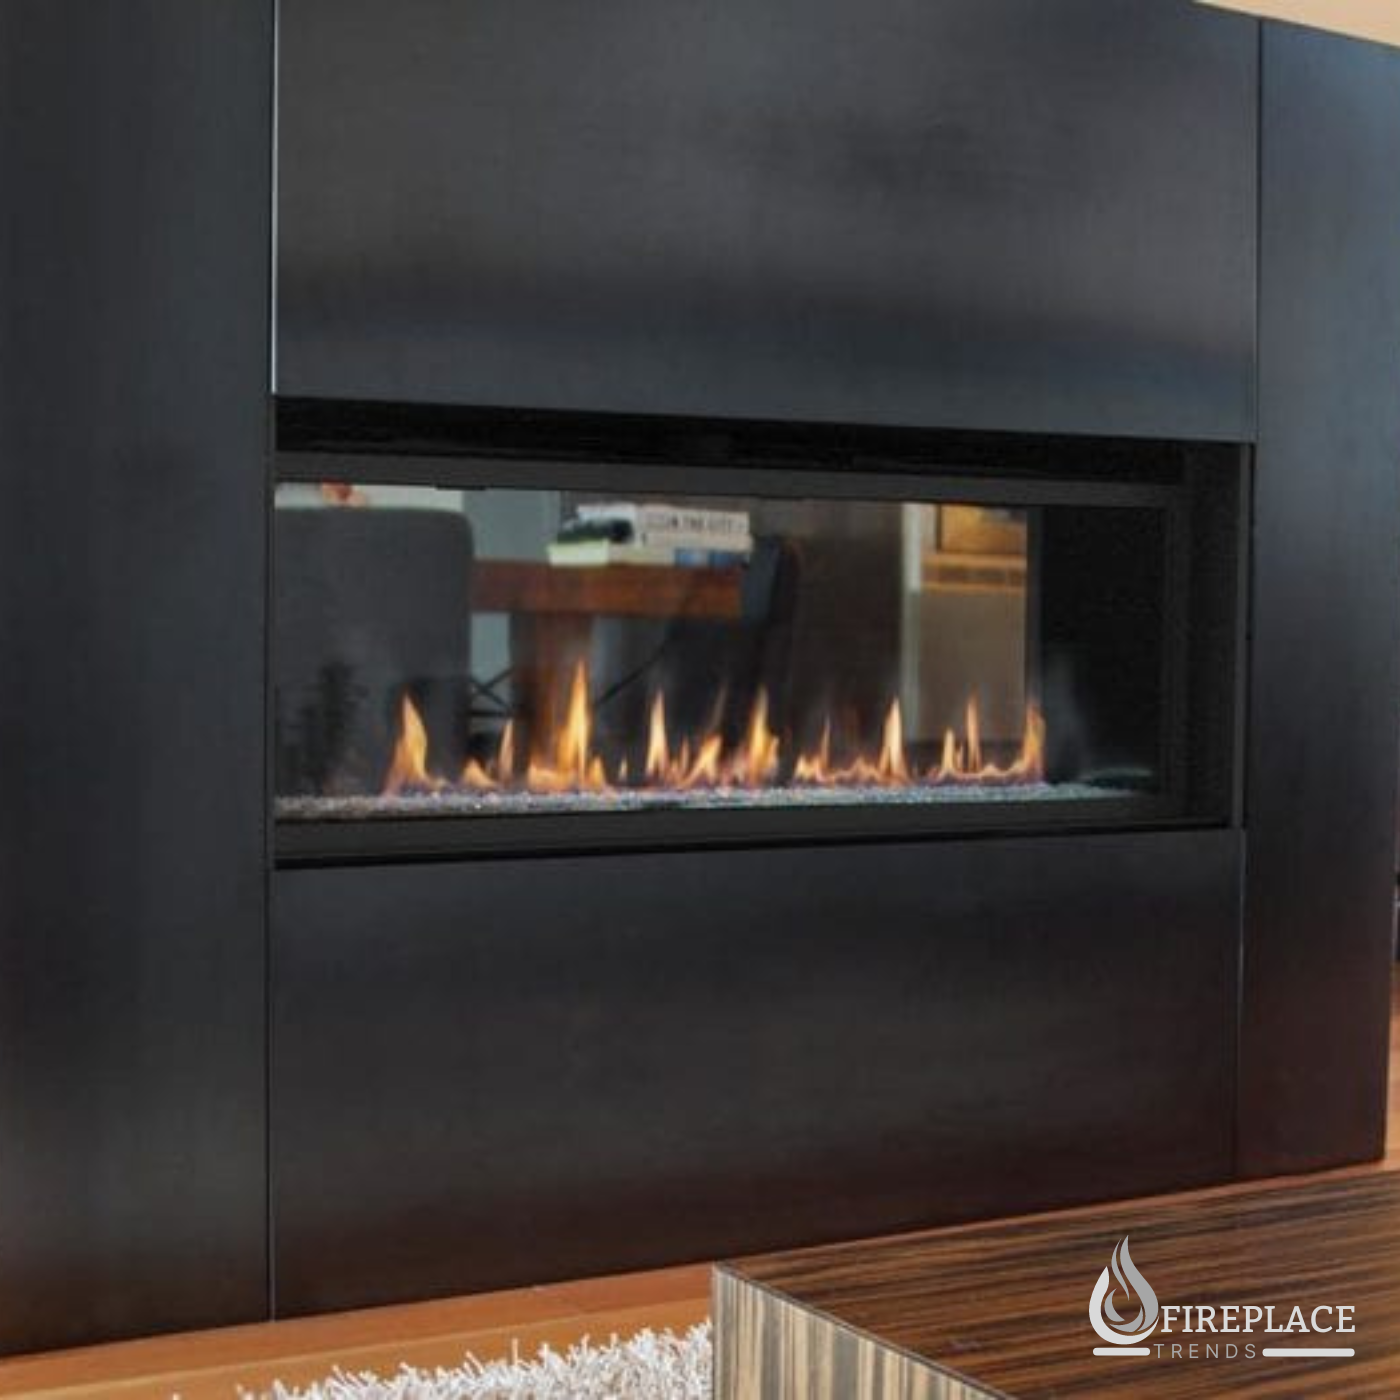 Superior - 84" - Electronic Ignition, Lights Direct Vent Linear Gas Fireplace - DRL 6000 Series